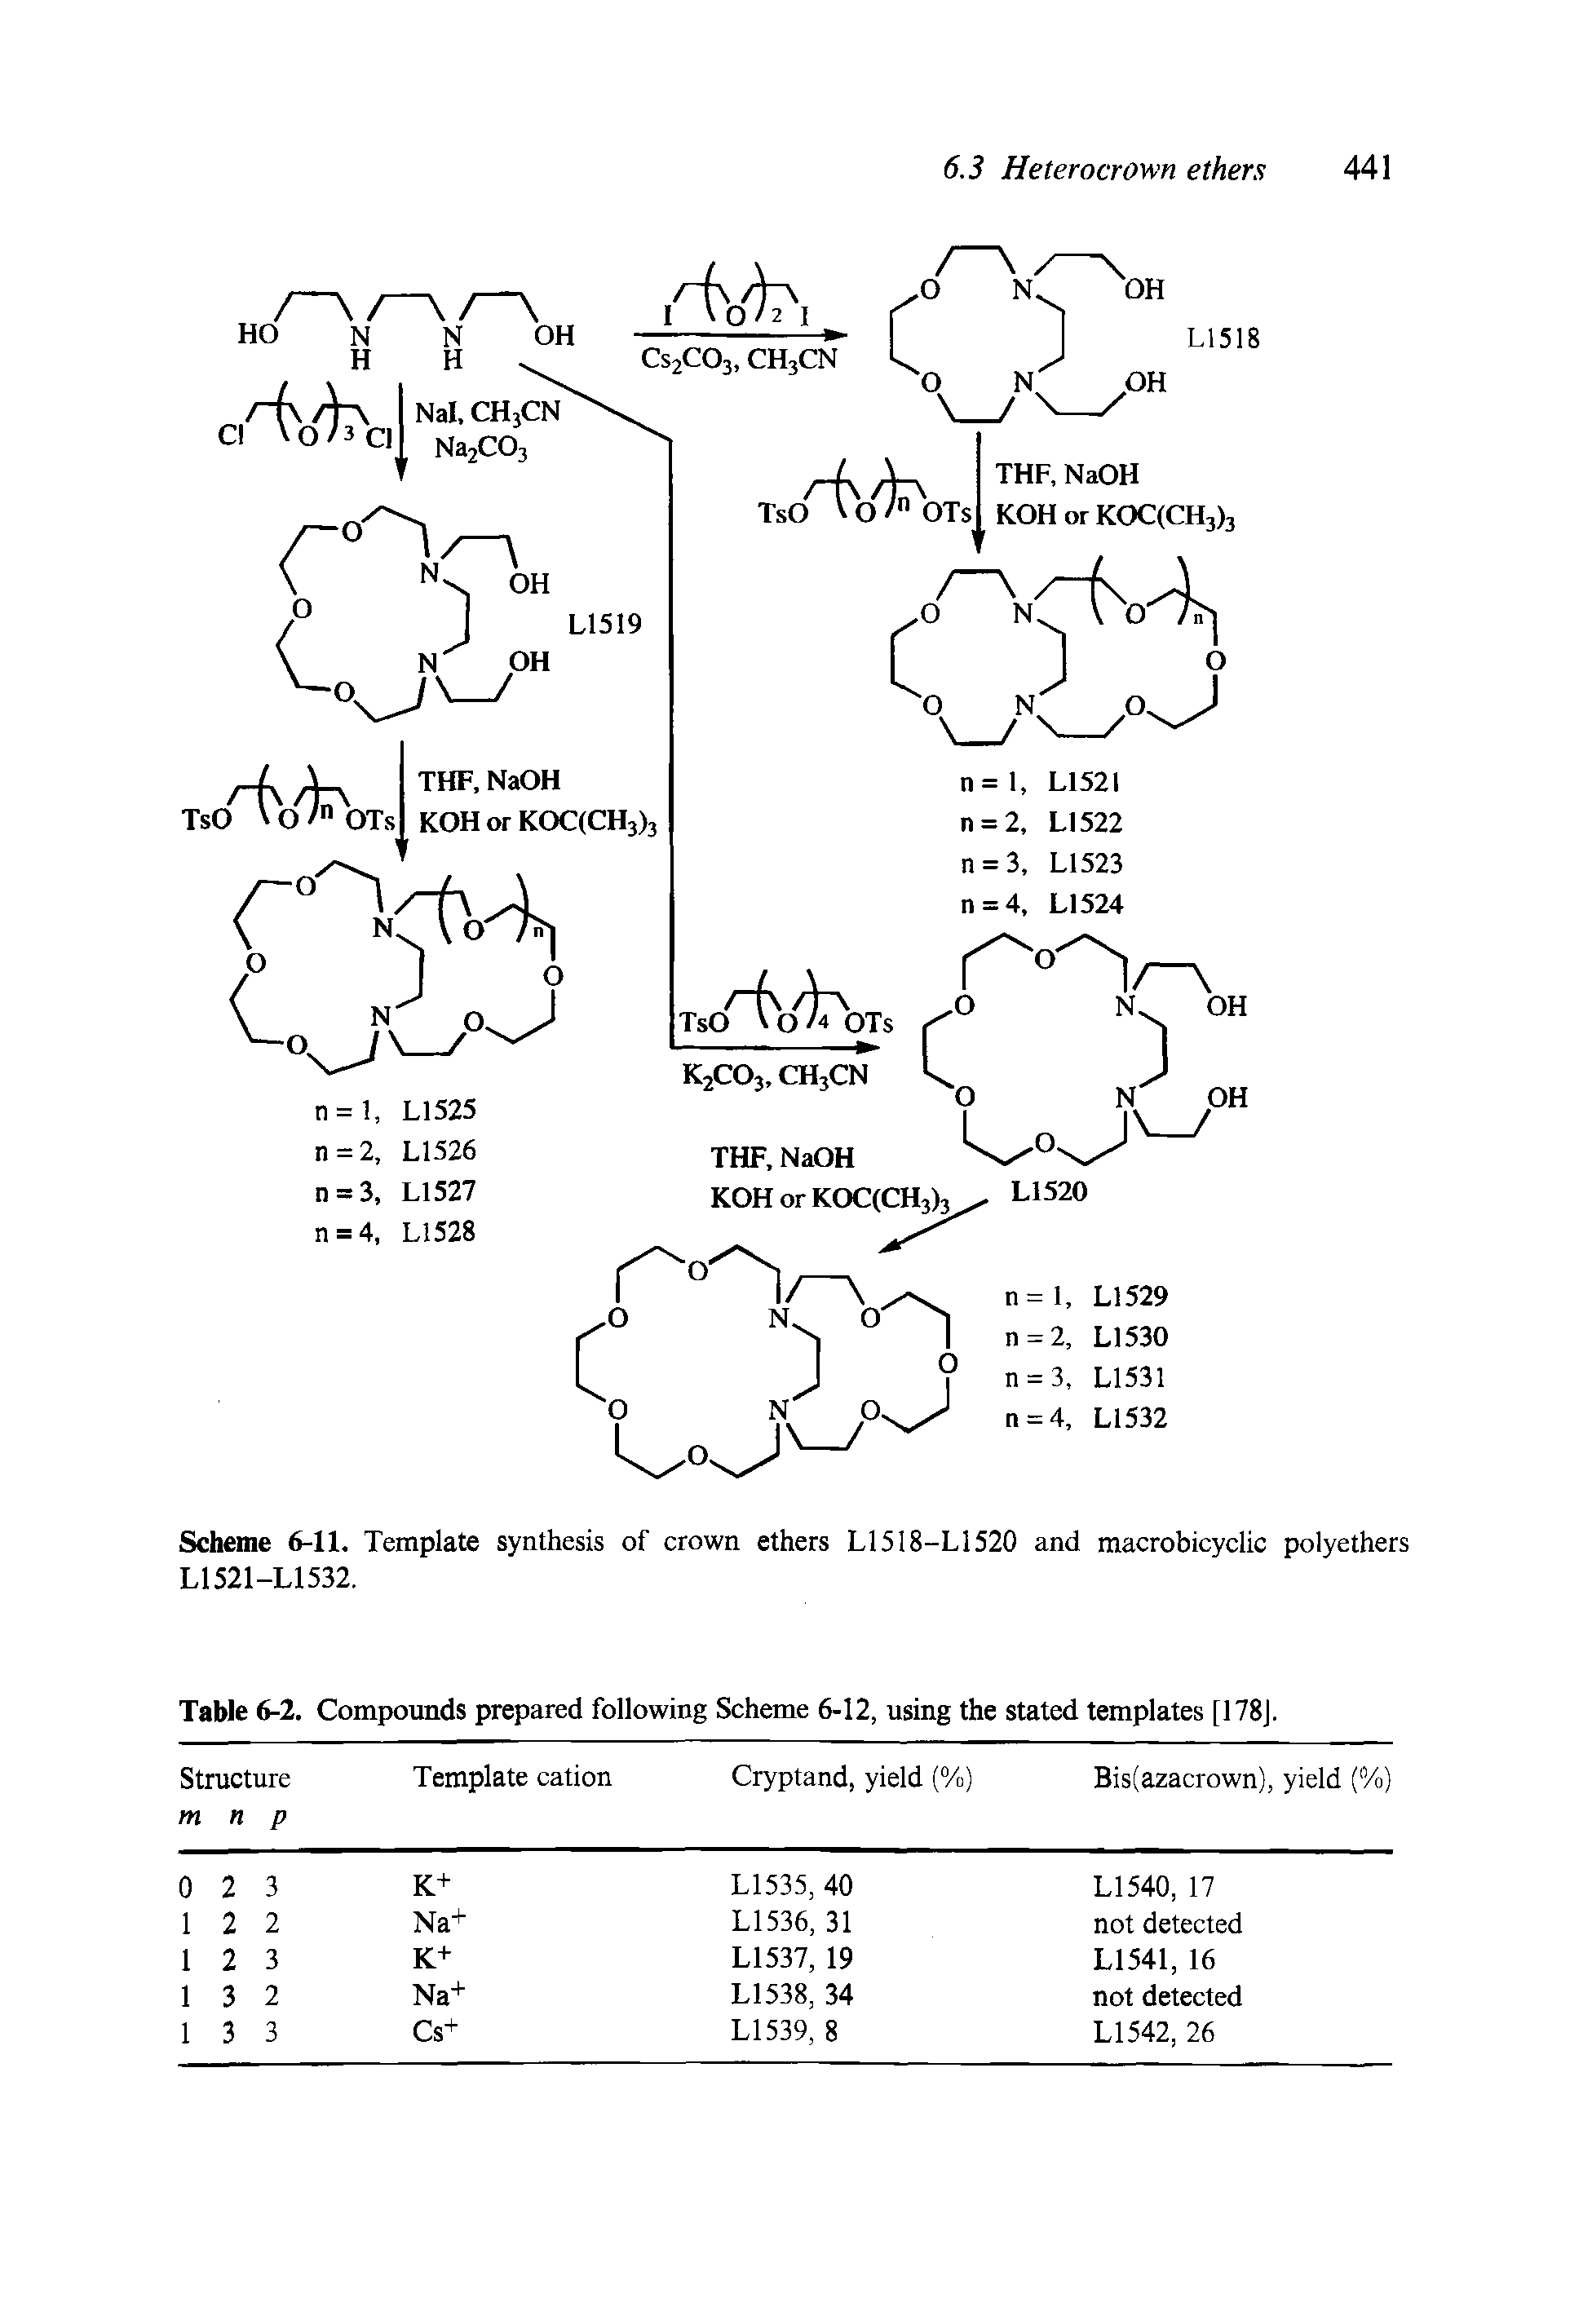 Scheme 6-11. Template synthesis of crown ethers L1518-L1520 and macrobicyclic polyethers L1521-L1532.